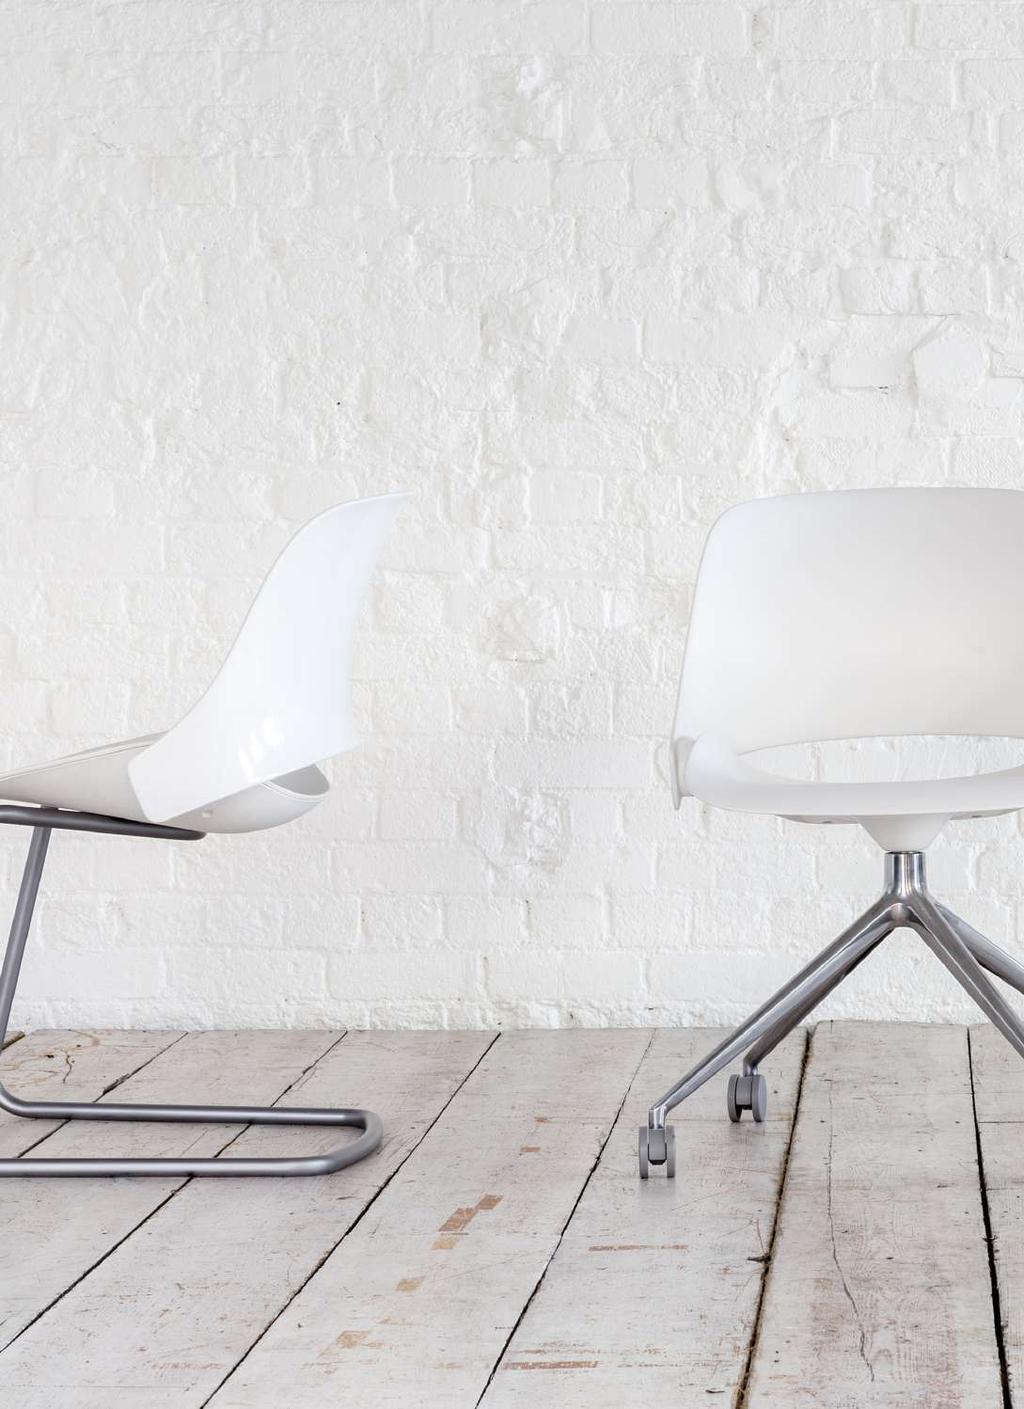 TREA Created in collaboration with visionary designer Todd Bracher, Humanscale s Trea chair features a sophisticated design that embodies versatility.